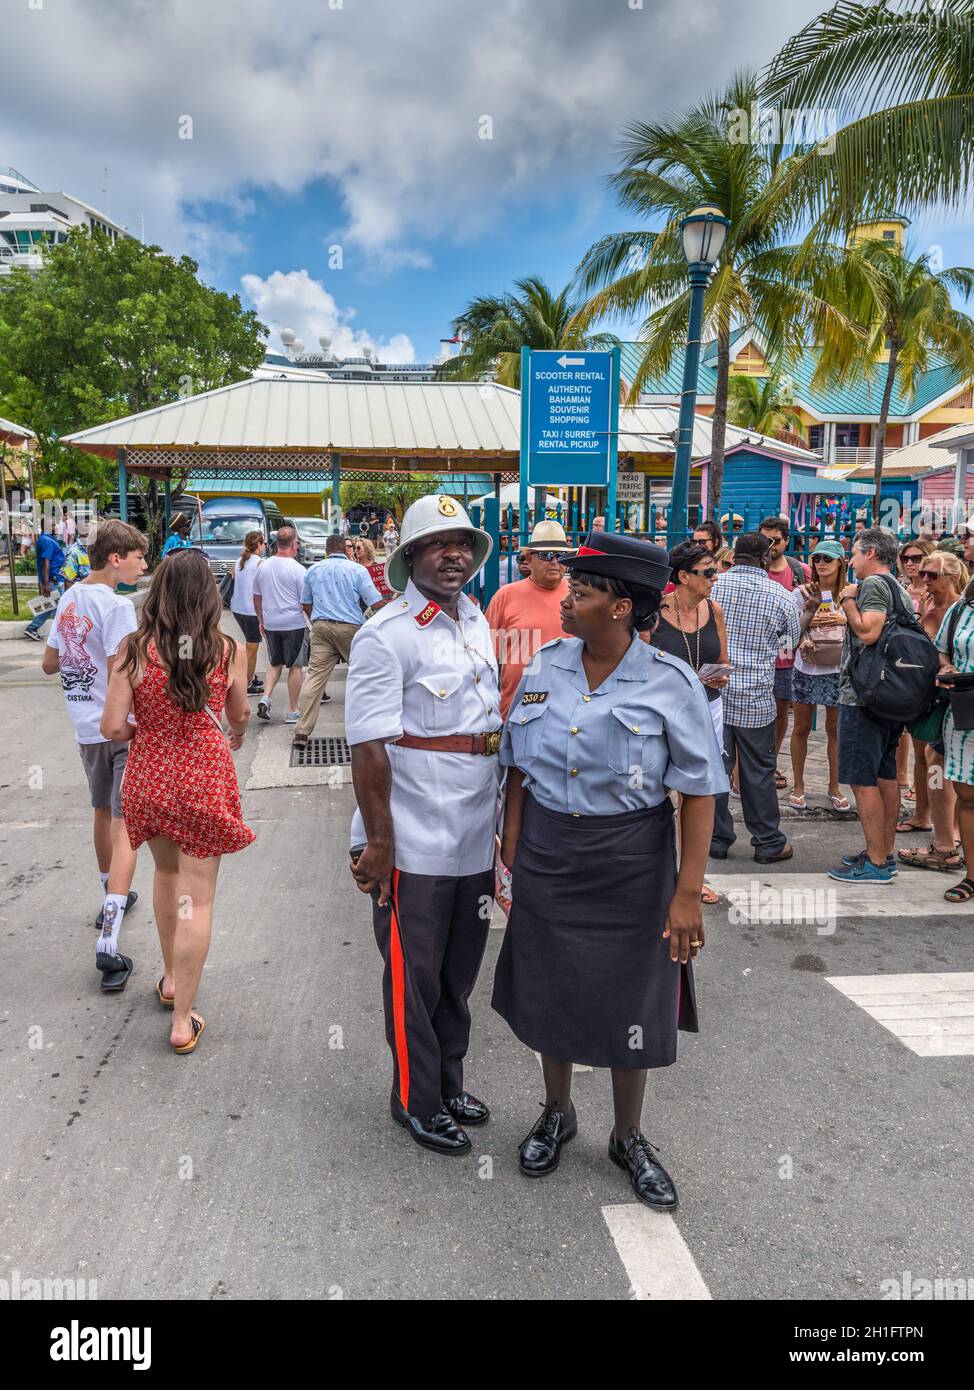 Nassau, Bahamas - May 3, 2019: Two Royal Bahamas Police officers (Man and woman) are keeping order in the streets. Nassau sees thousands of visitors d Stock Photo